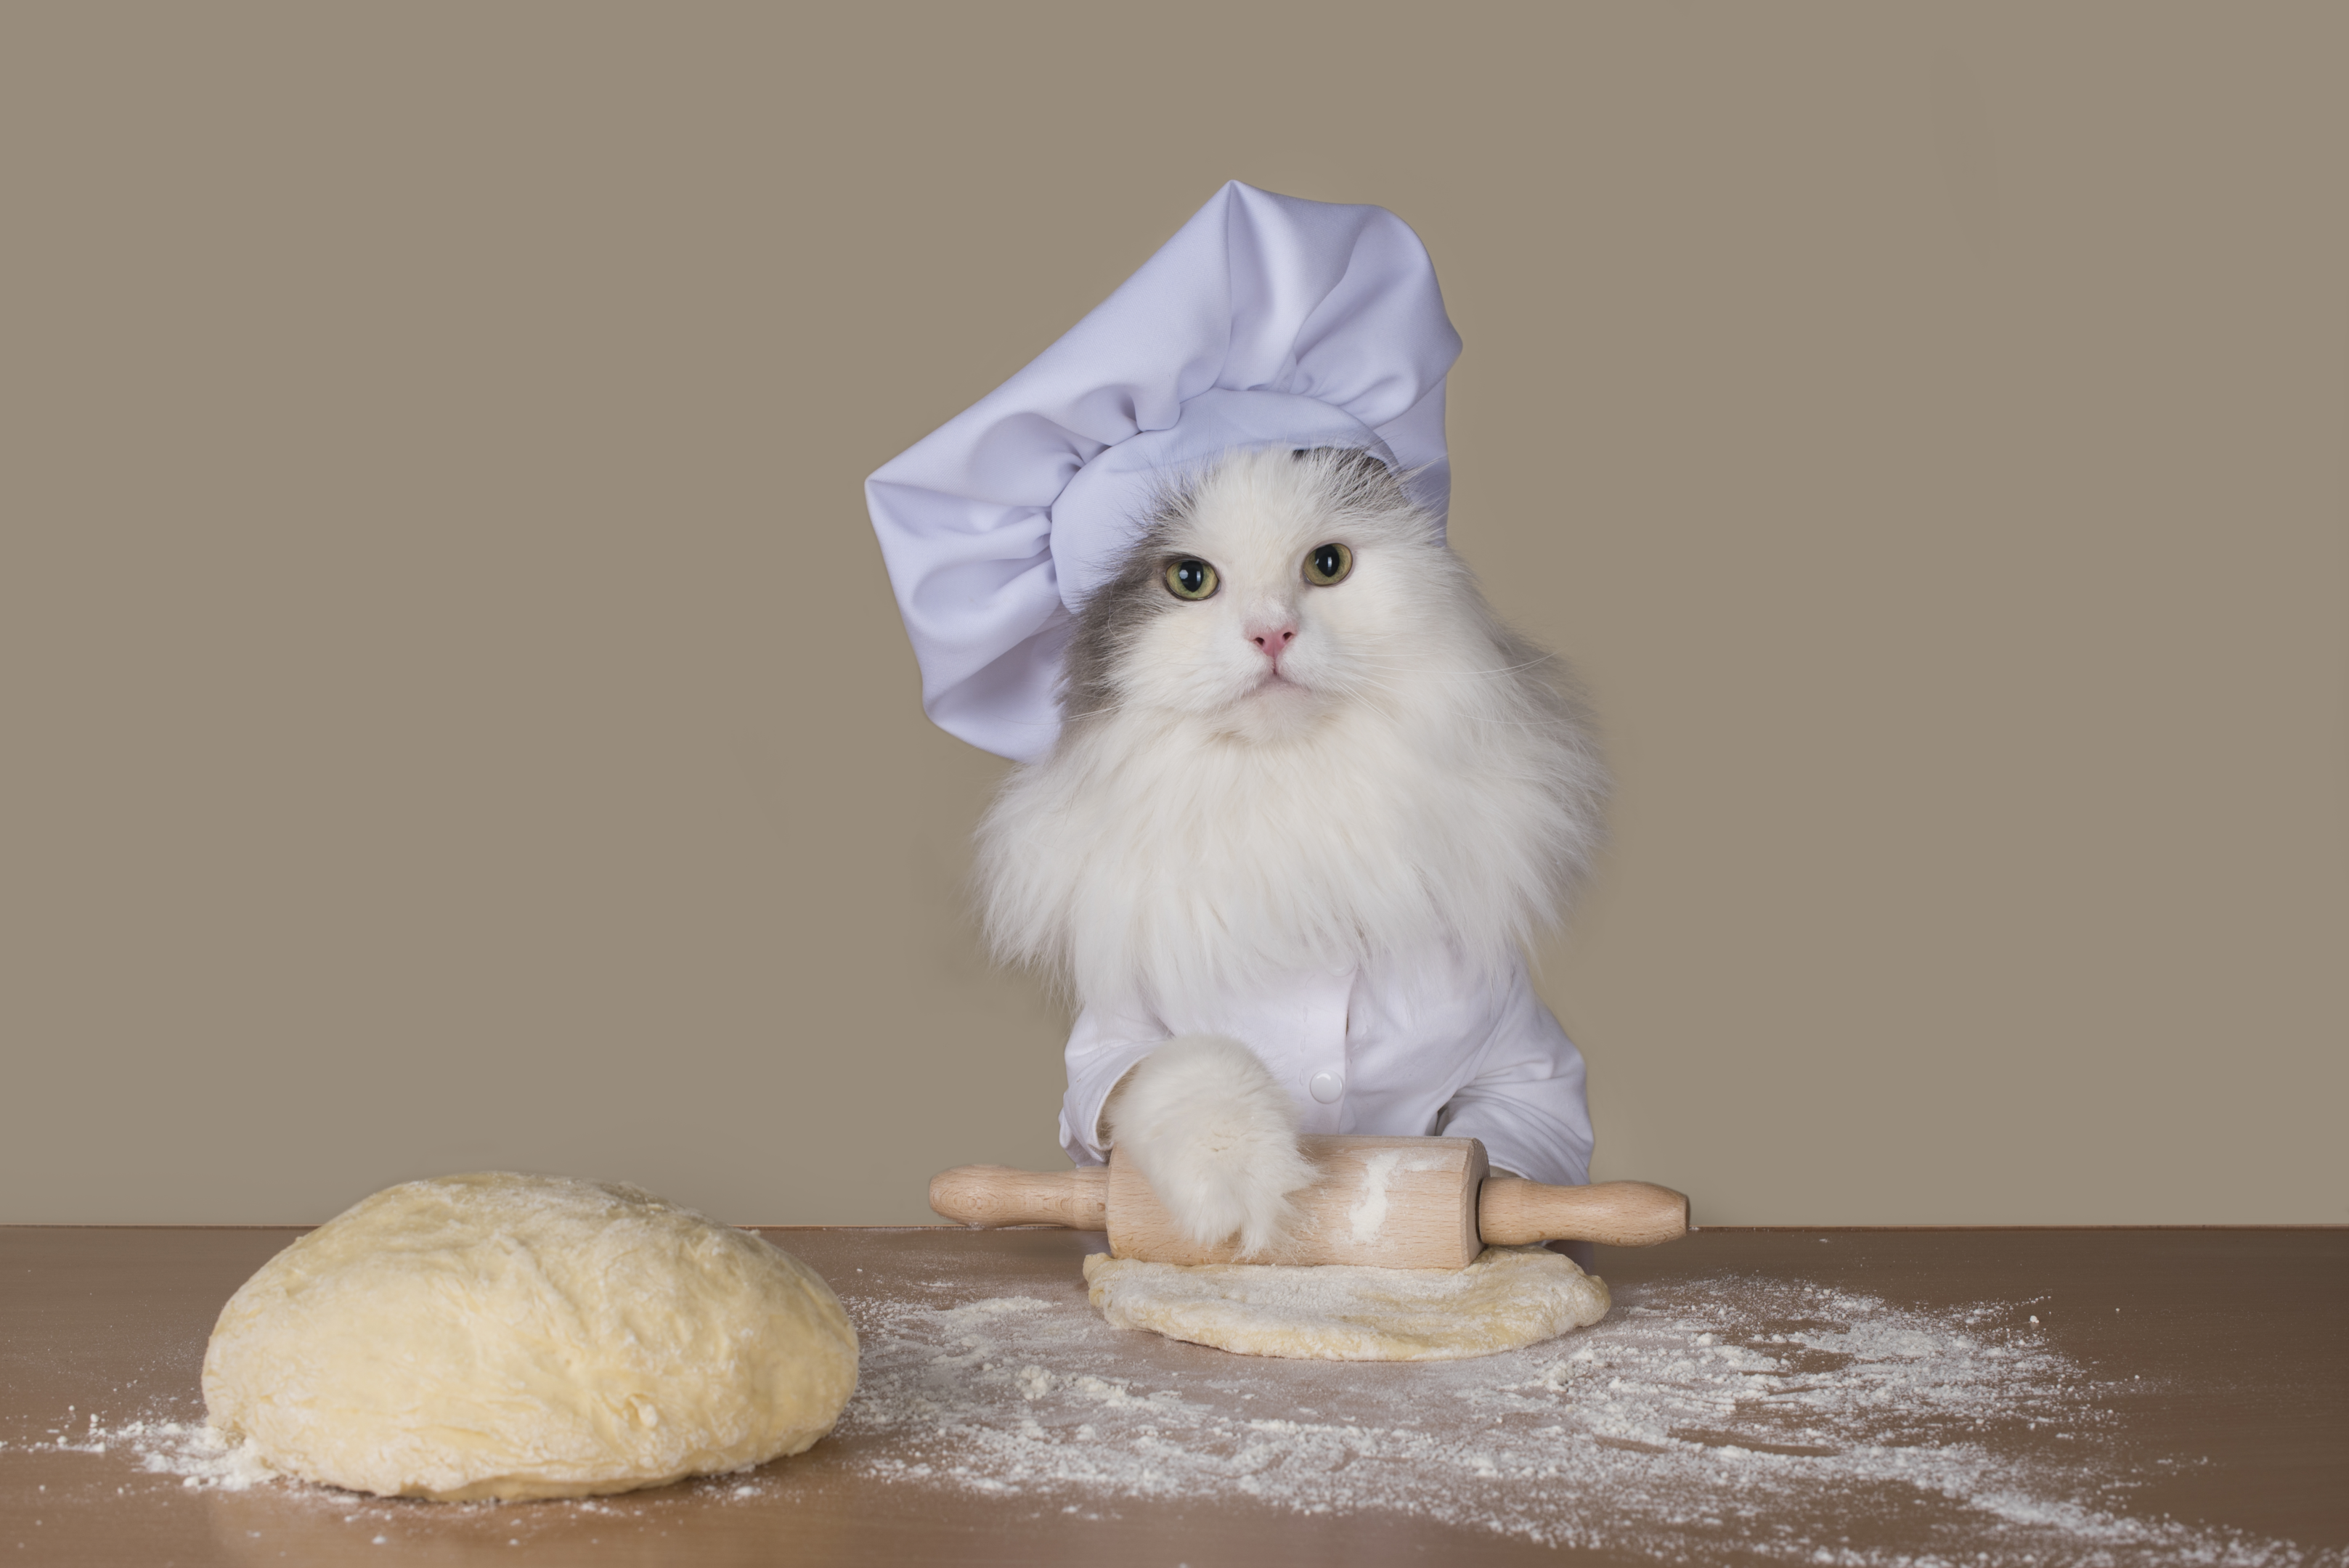 Cat kneading dough with front paws holding a rolling pin and wearing a hat. This cat is literally making biscuits.